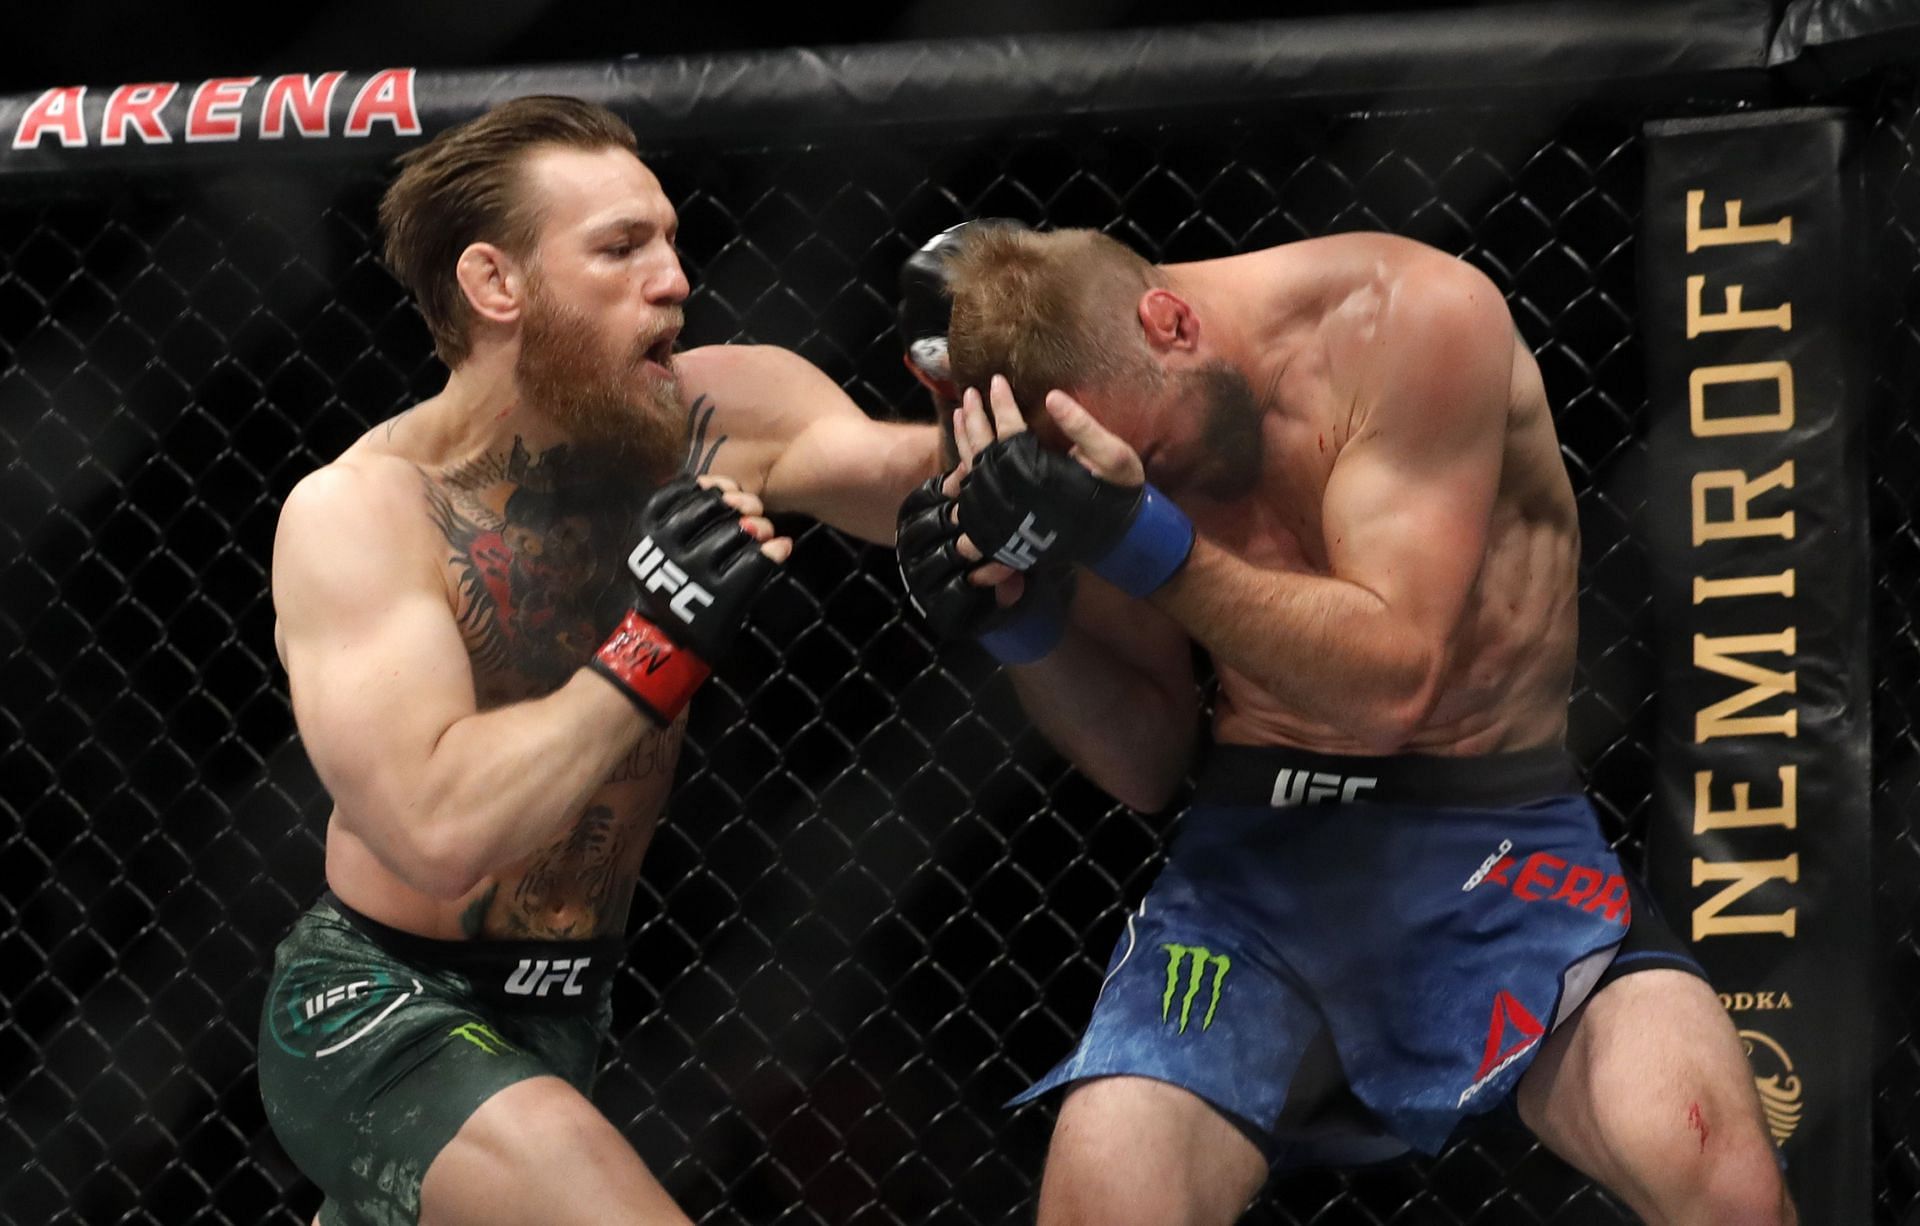 Conor McGregor packs crazy power in his strikes at any weight